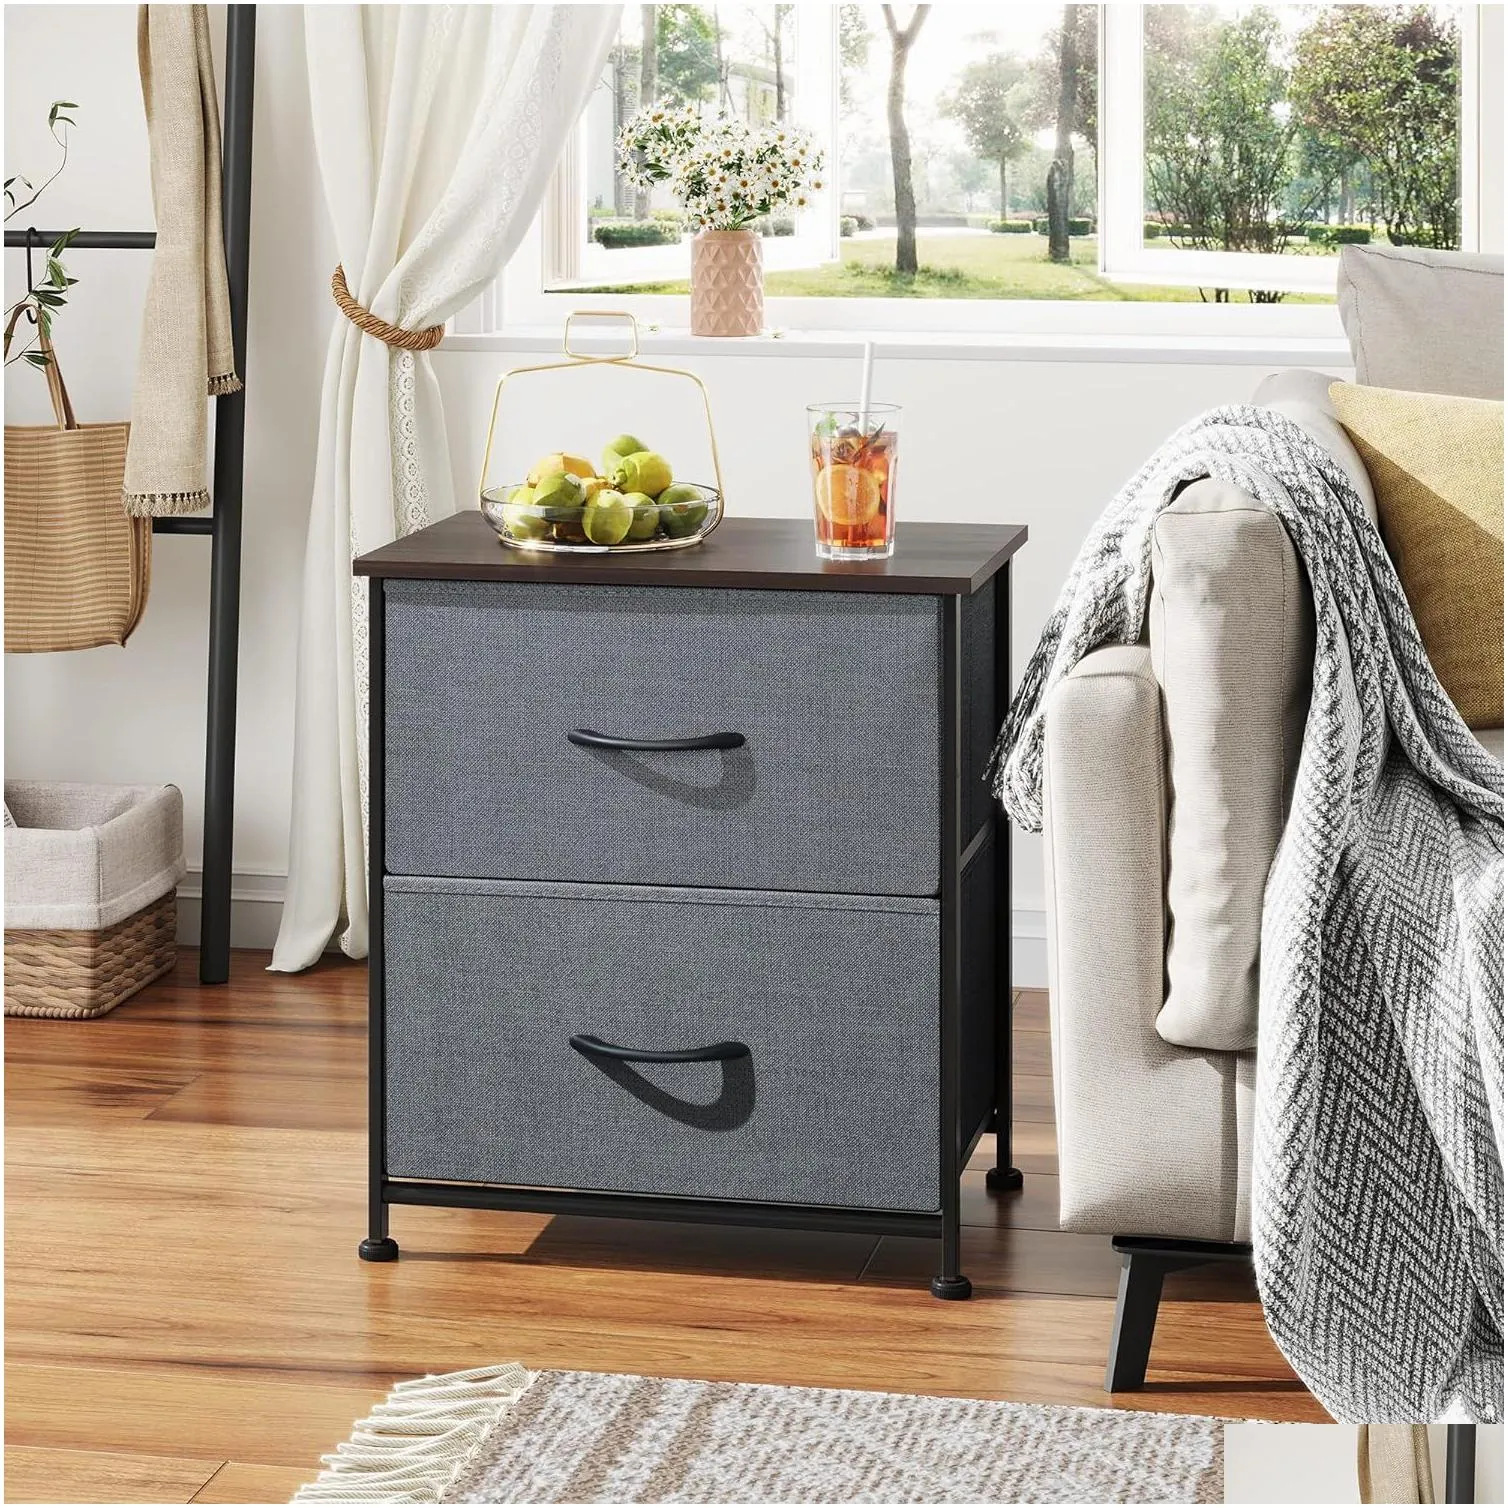 WLIVE Nightstand A set of 2,2 drawer dressers,2 drawer small dressers, bedside furniture, nightstand, nightstand with fabric box, University dorm, dark